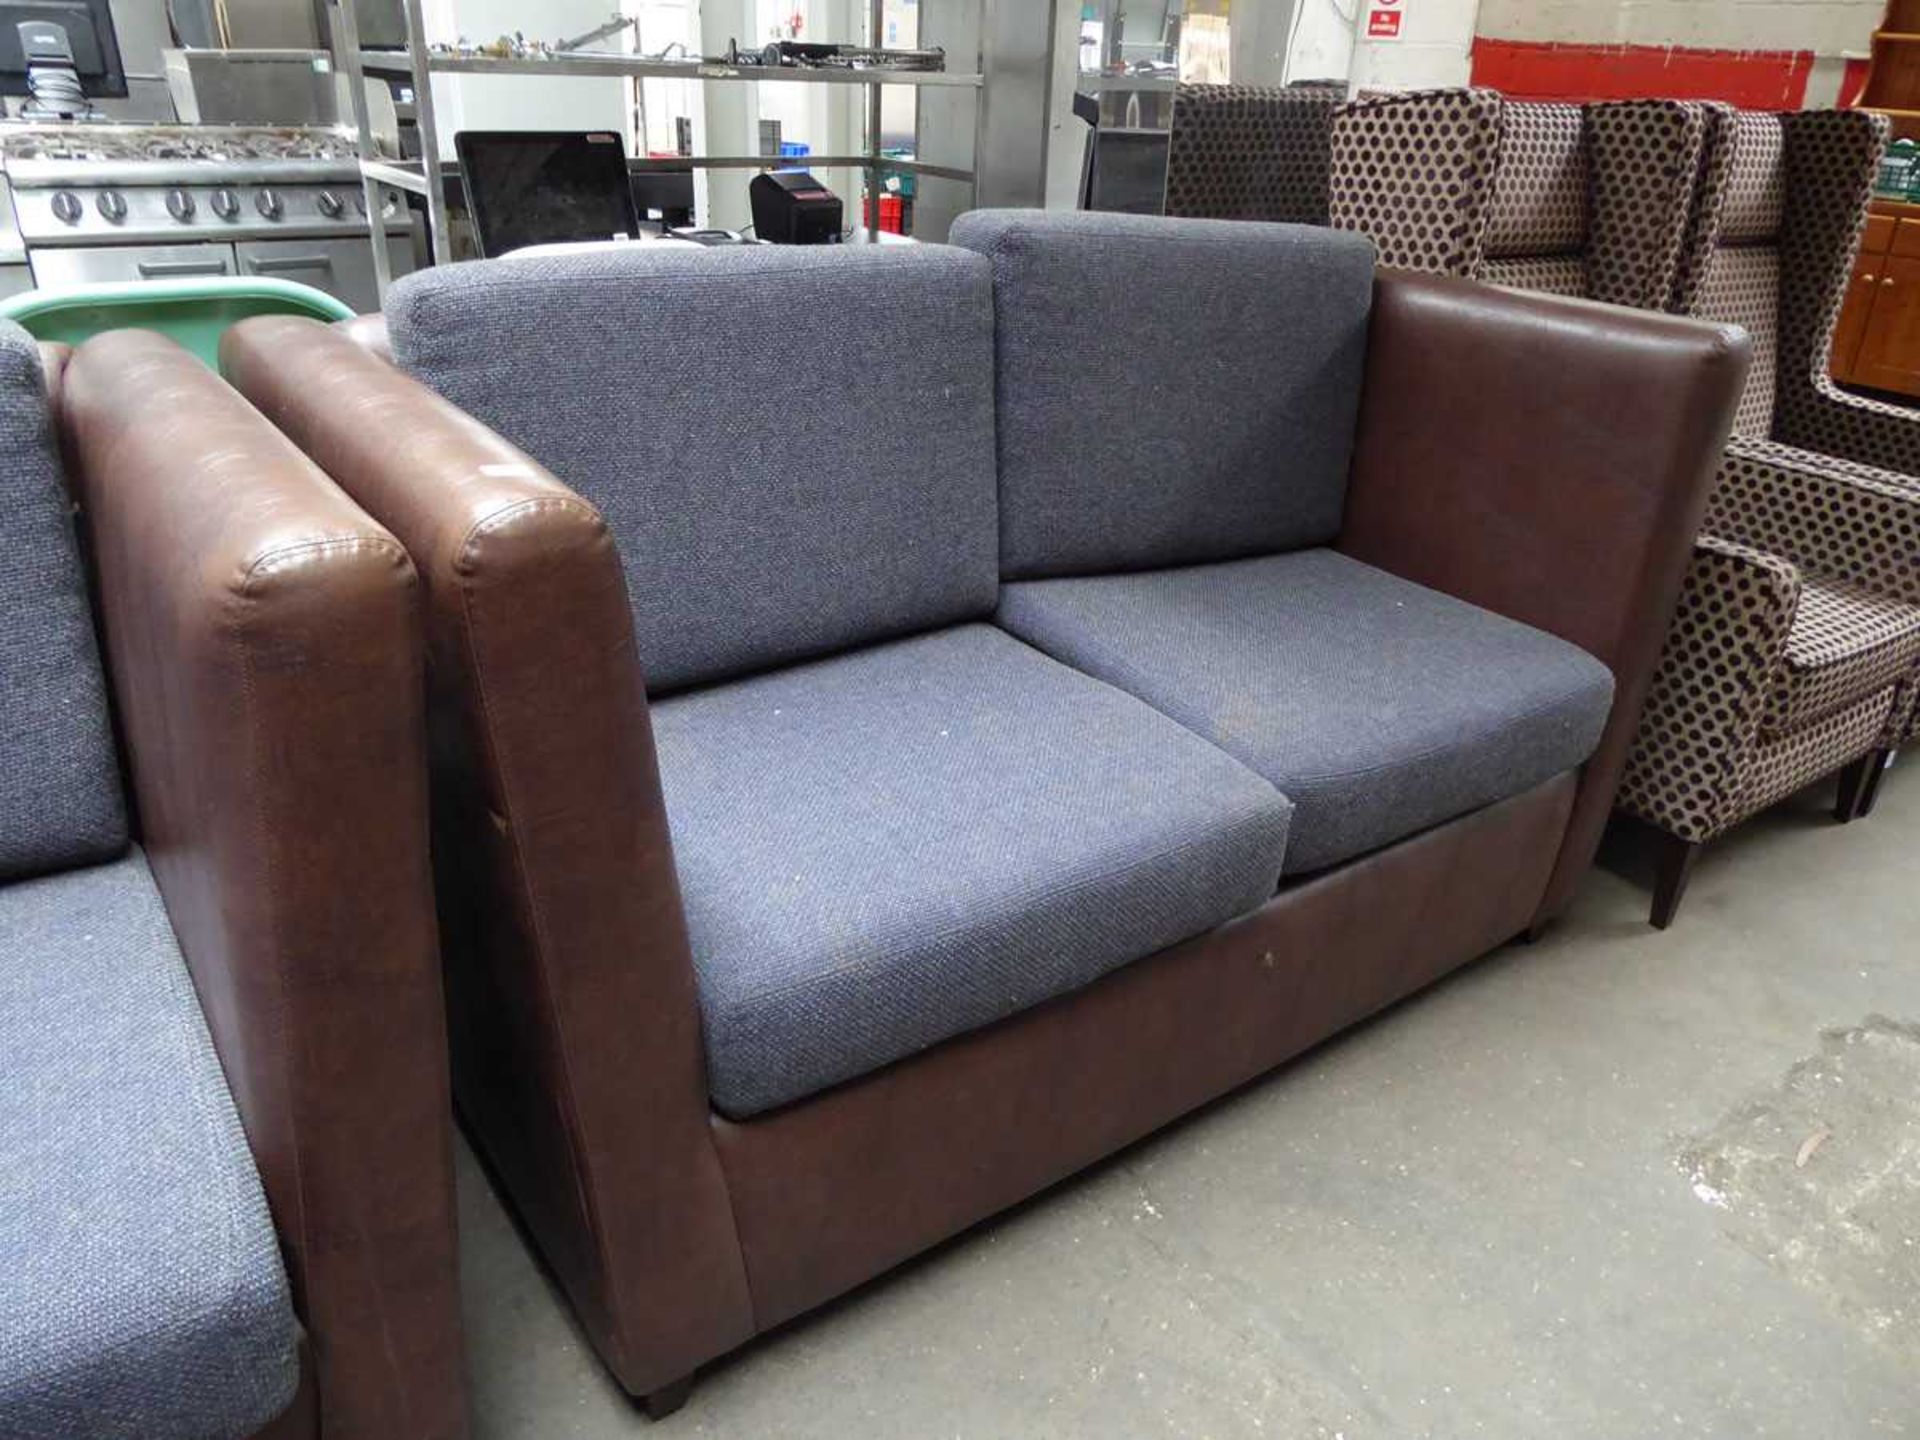 170cm brown vinyl leather effect high back 2 seater settees with grey upholstered cushions